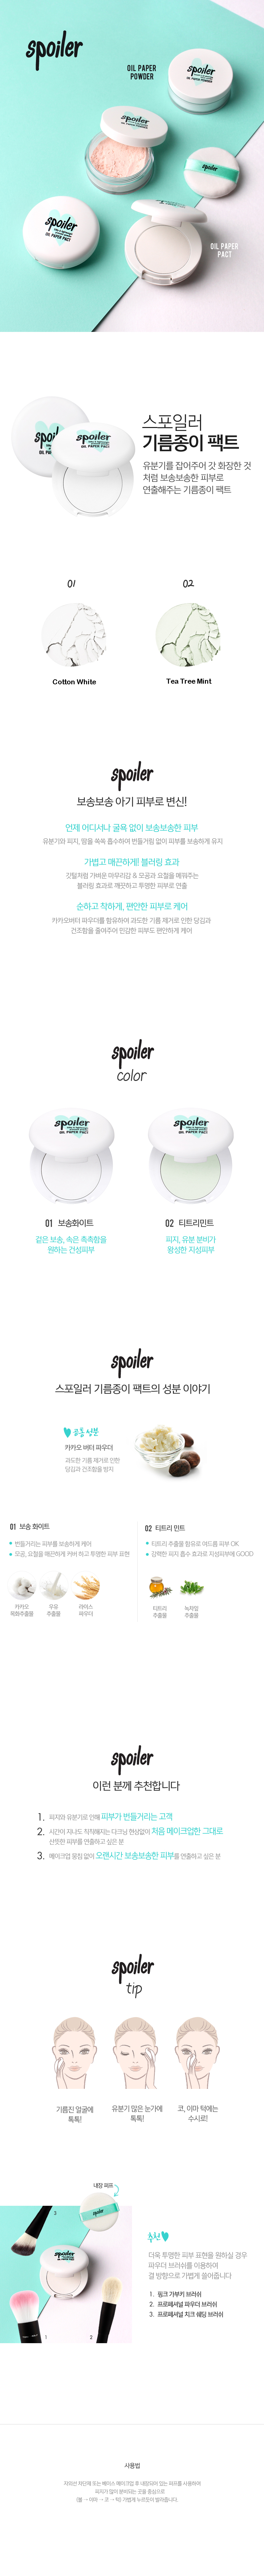 TONYMOLY Spoiler Oil Paper Pact #02 Teatree Mint